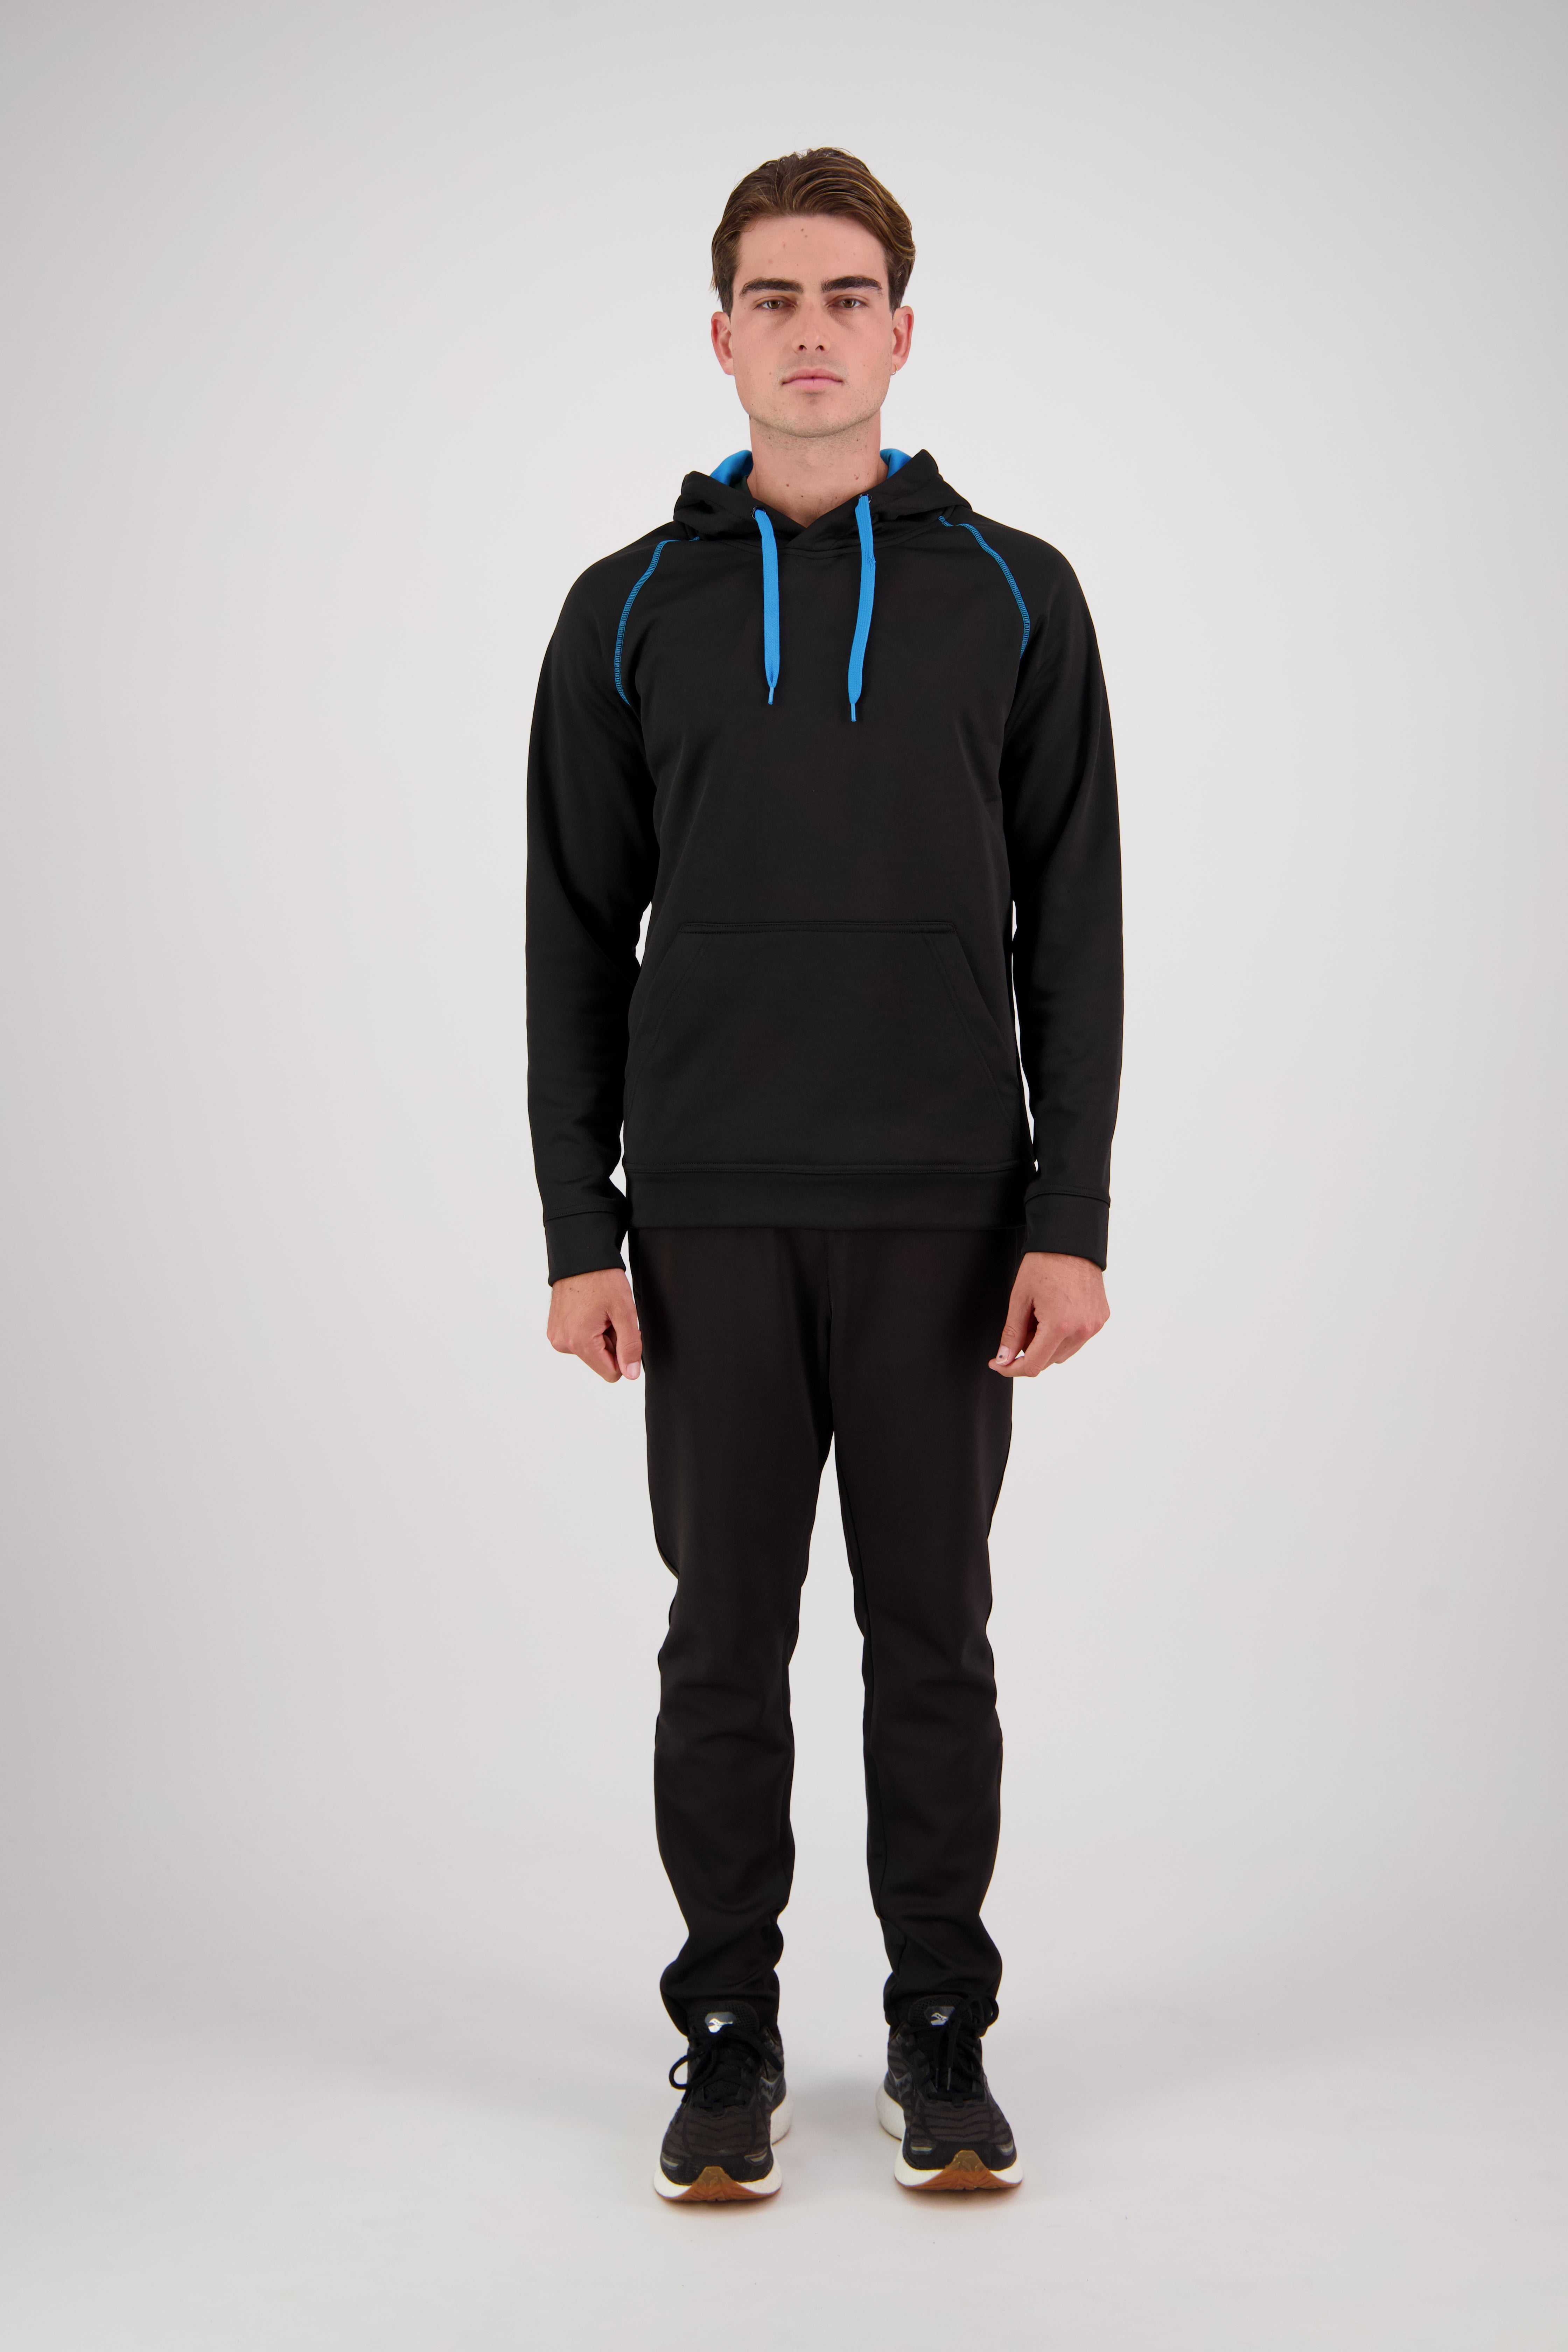 XT Performance Pullover Hoodie